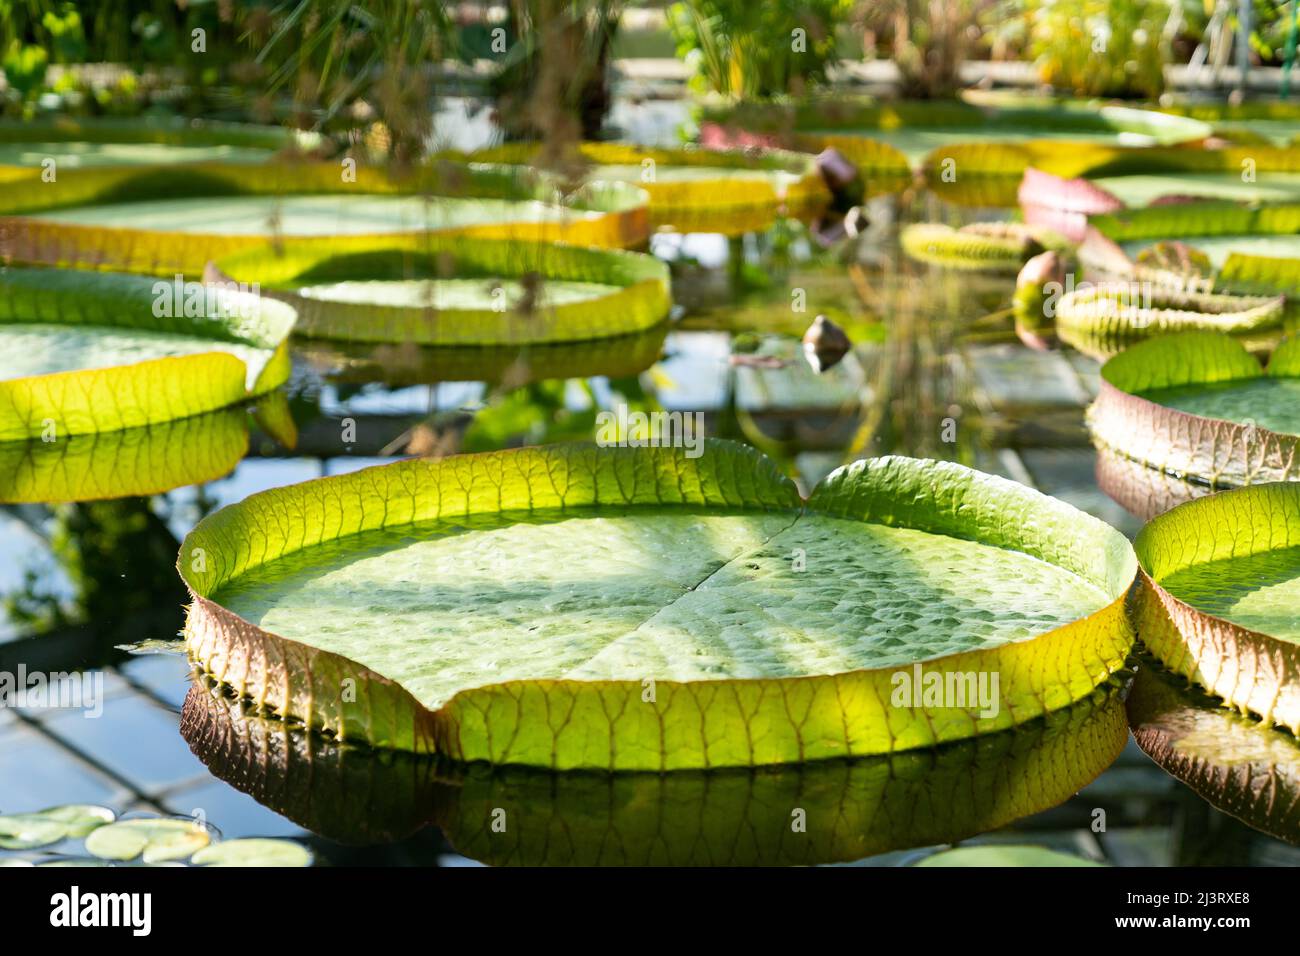 Glasshouse with tropical Victoria amazonica, giant water lily and aquatic plants.  Stock Photo